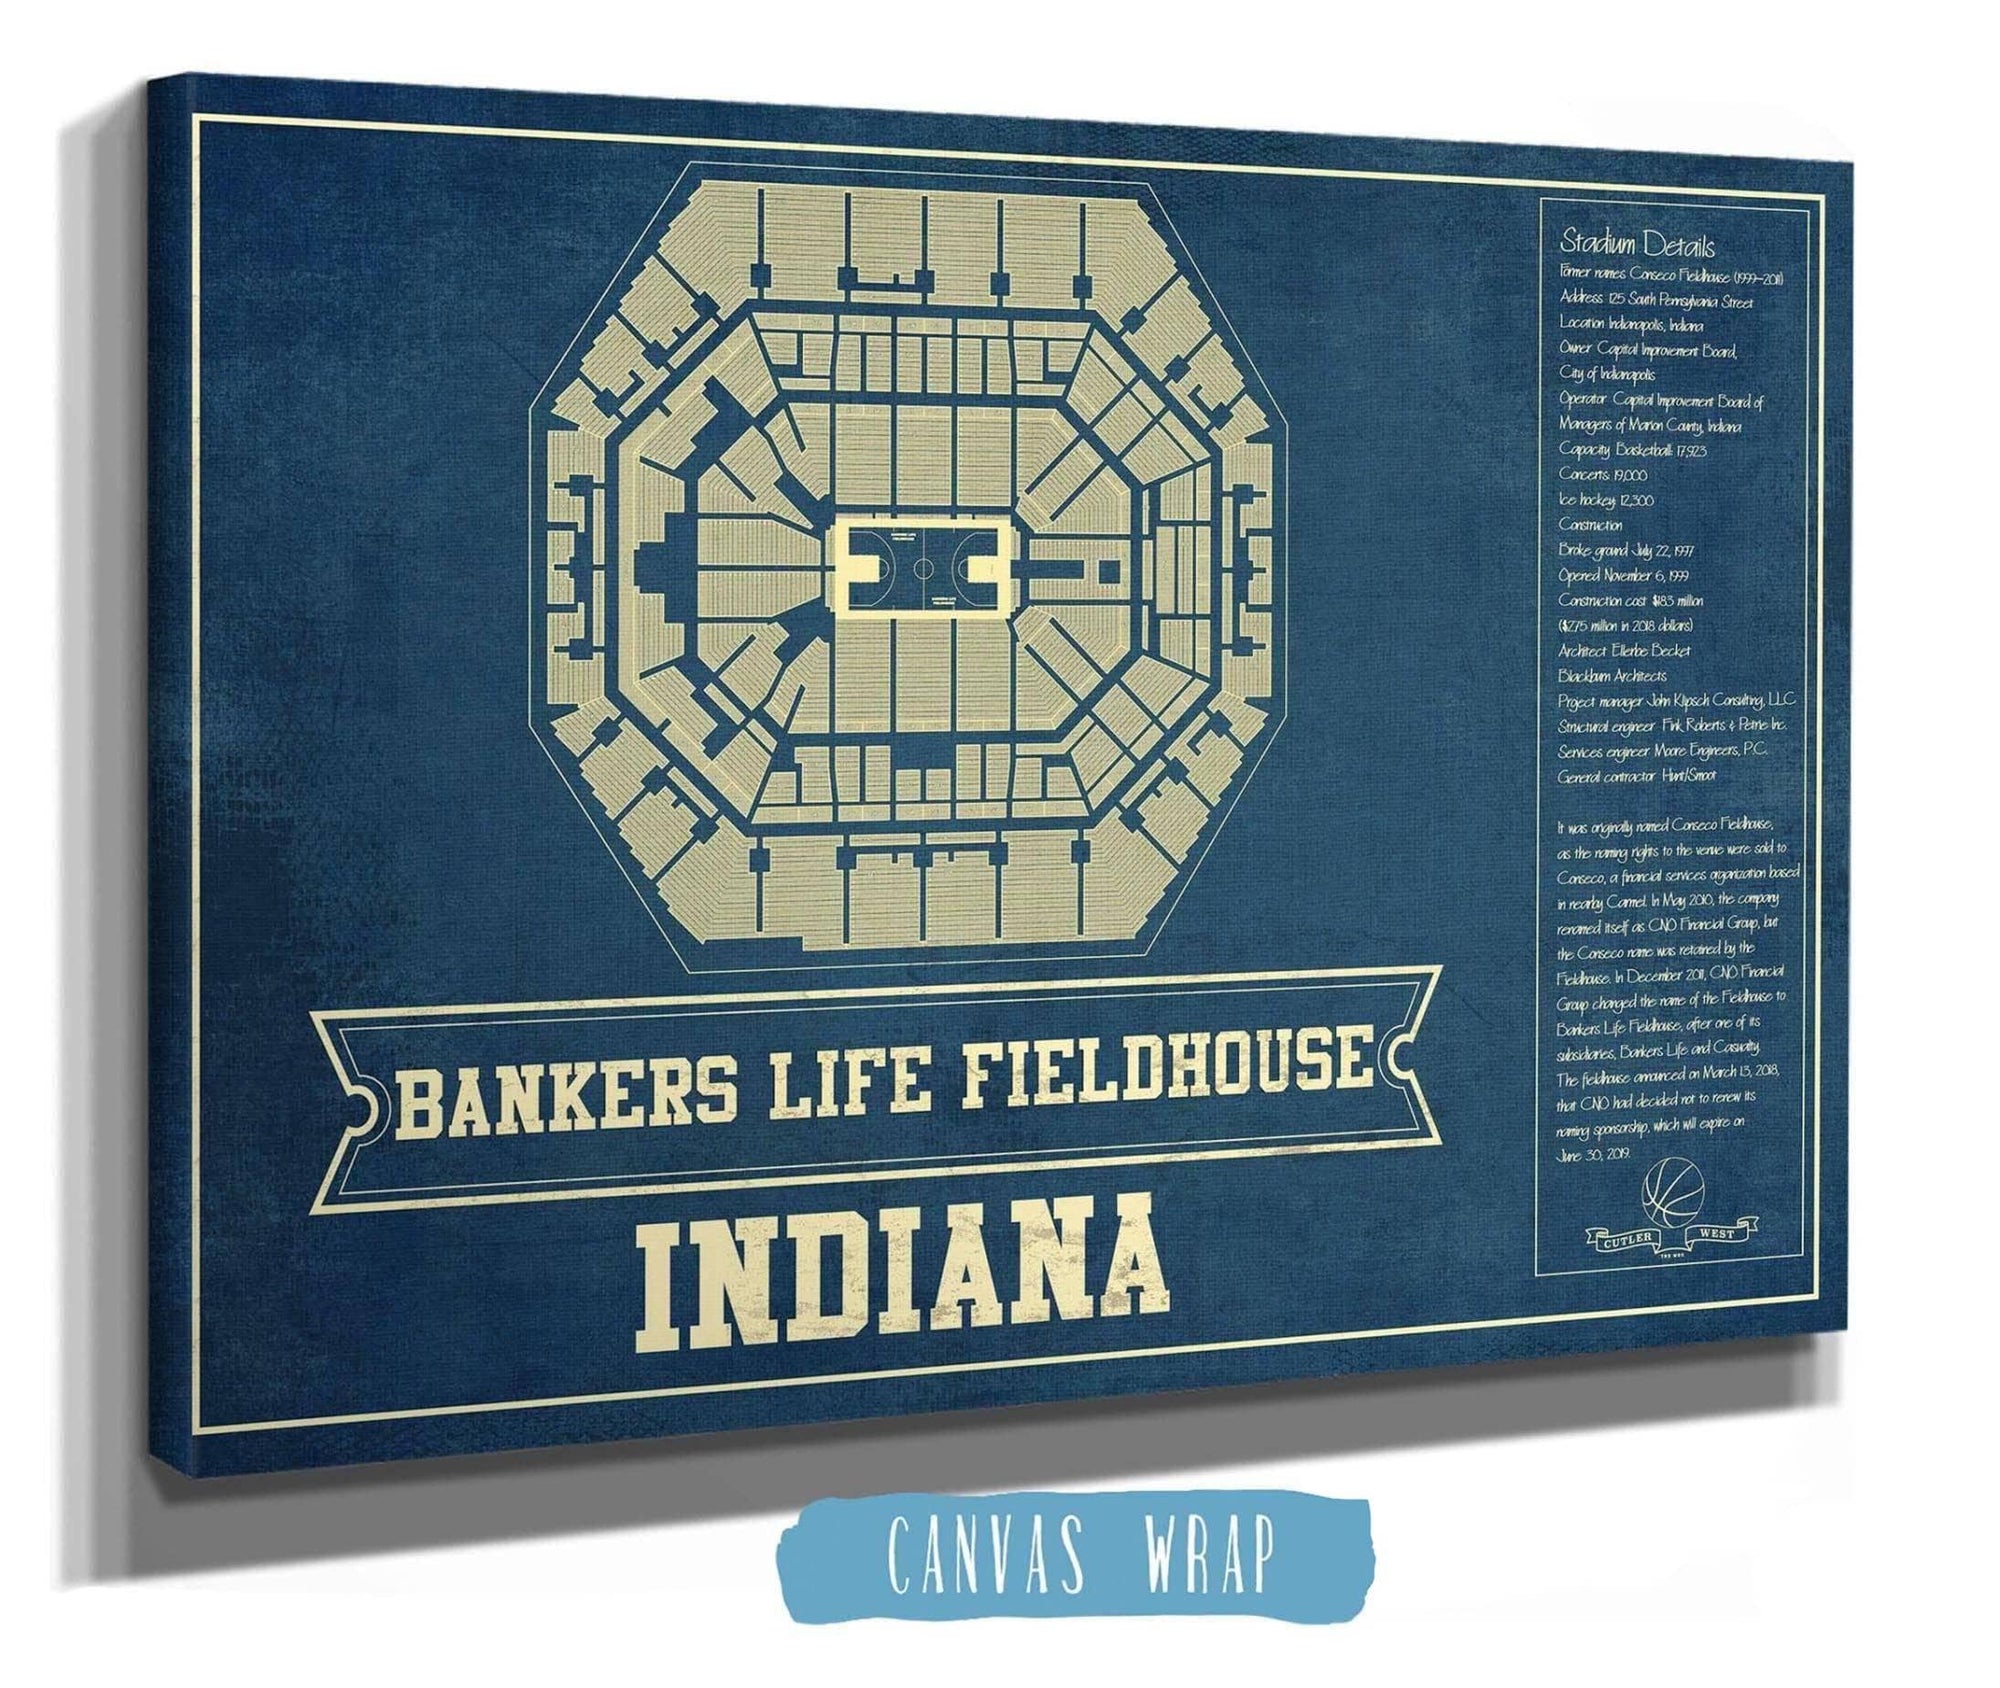 Cutler West Basketball Collection Indiana Pacers Bankers Life Fieldhouse Vintage Basketball Blueprint NBA Print